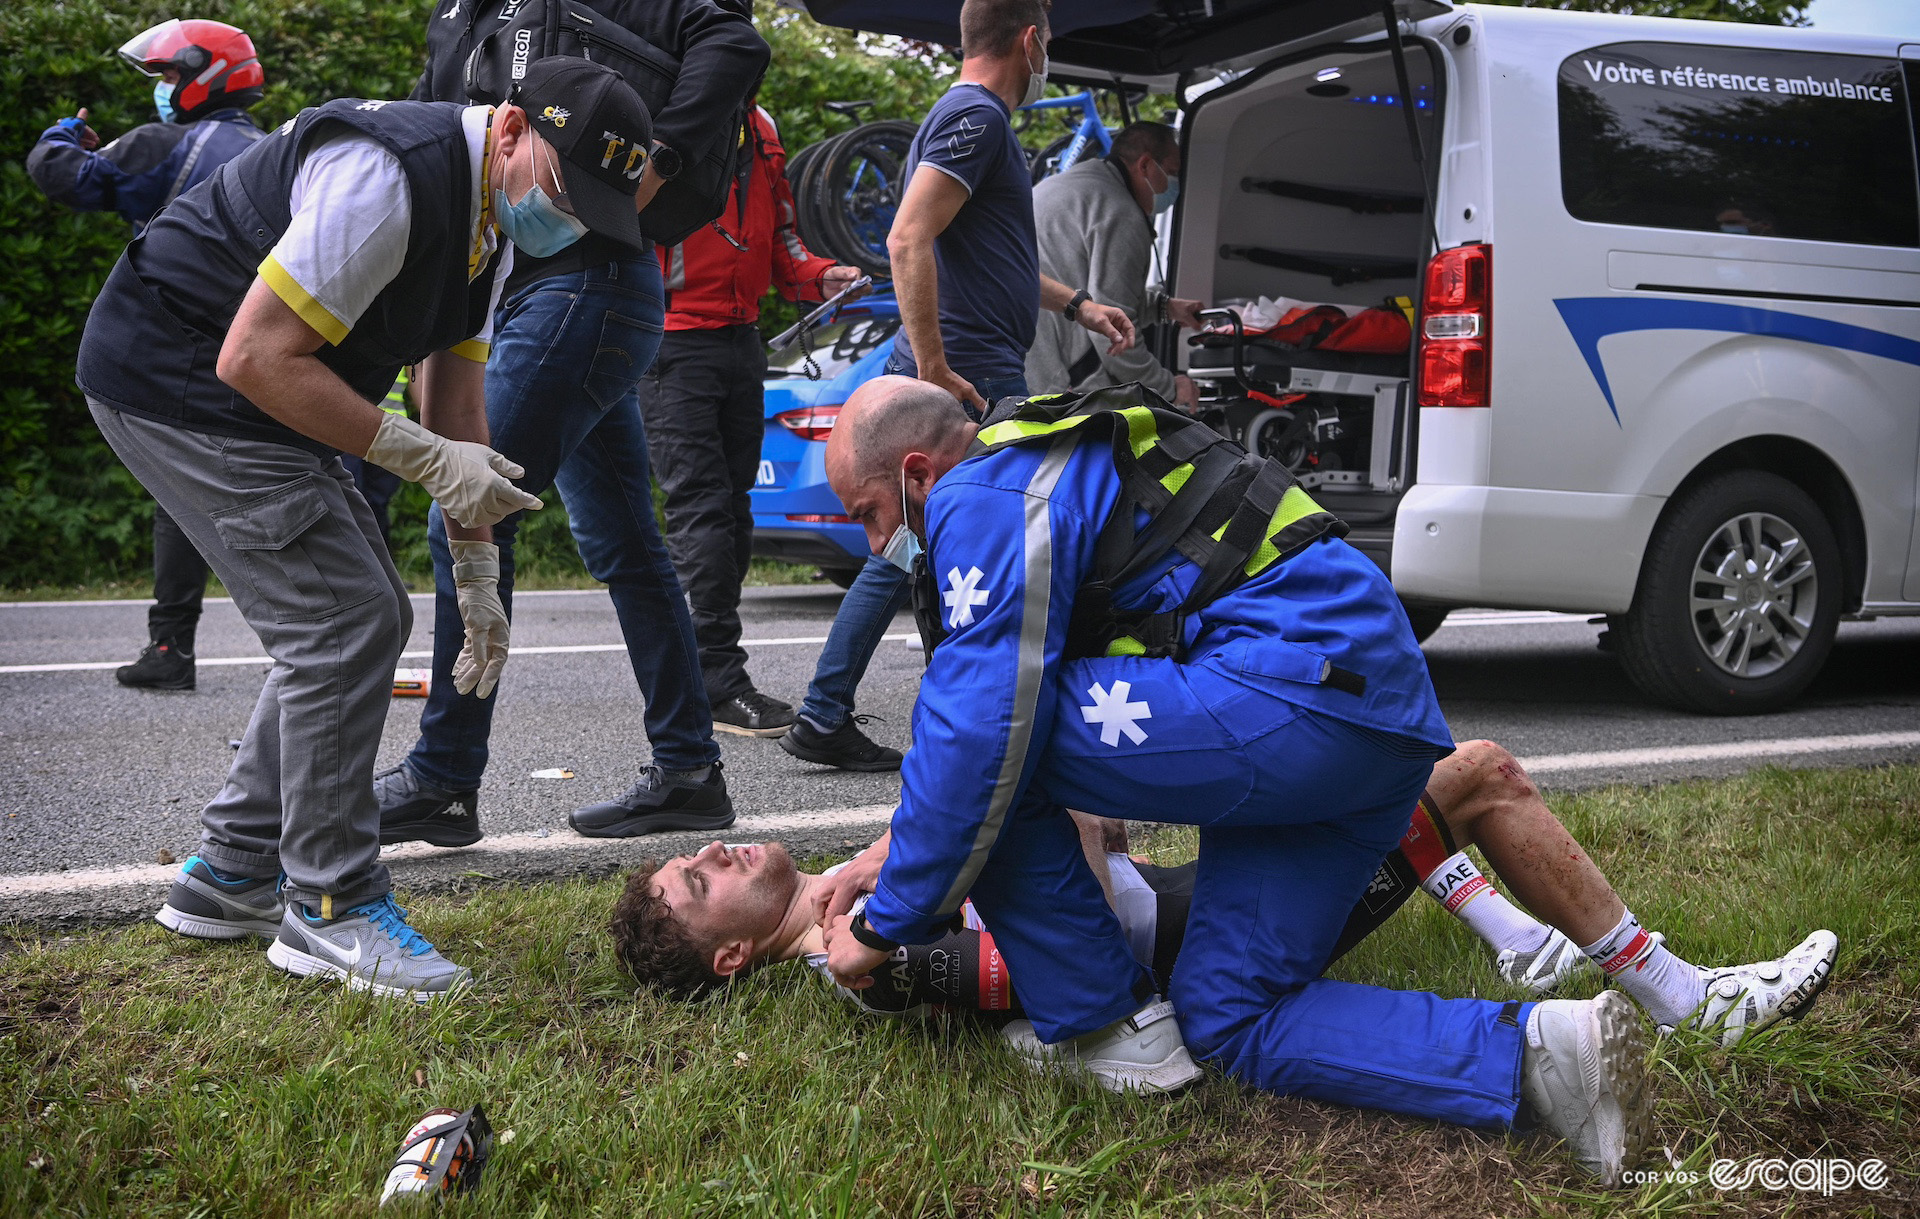 Marc Hirschi pictured lying on his back on the grass verge as he's assessed by a paramedic after a crash on stage 1 of the 2021 Tour de France.